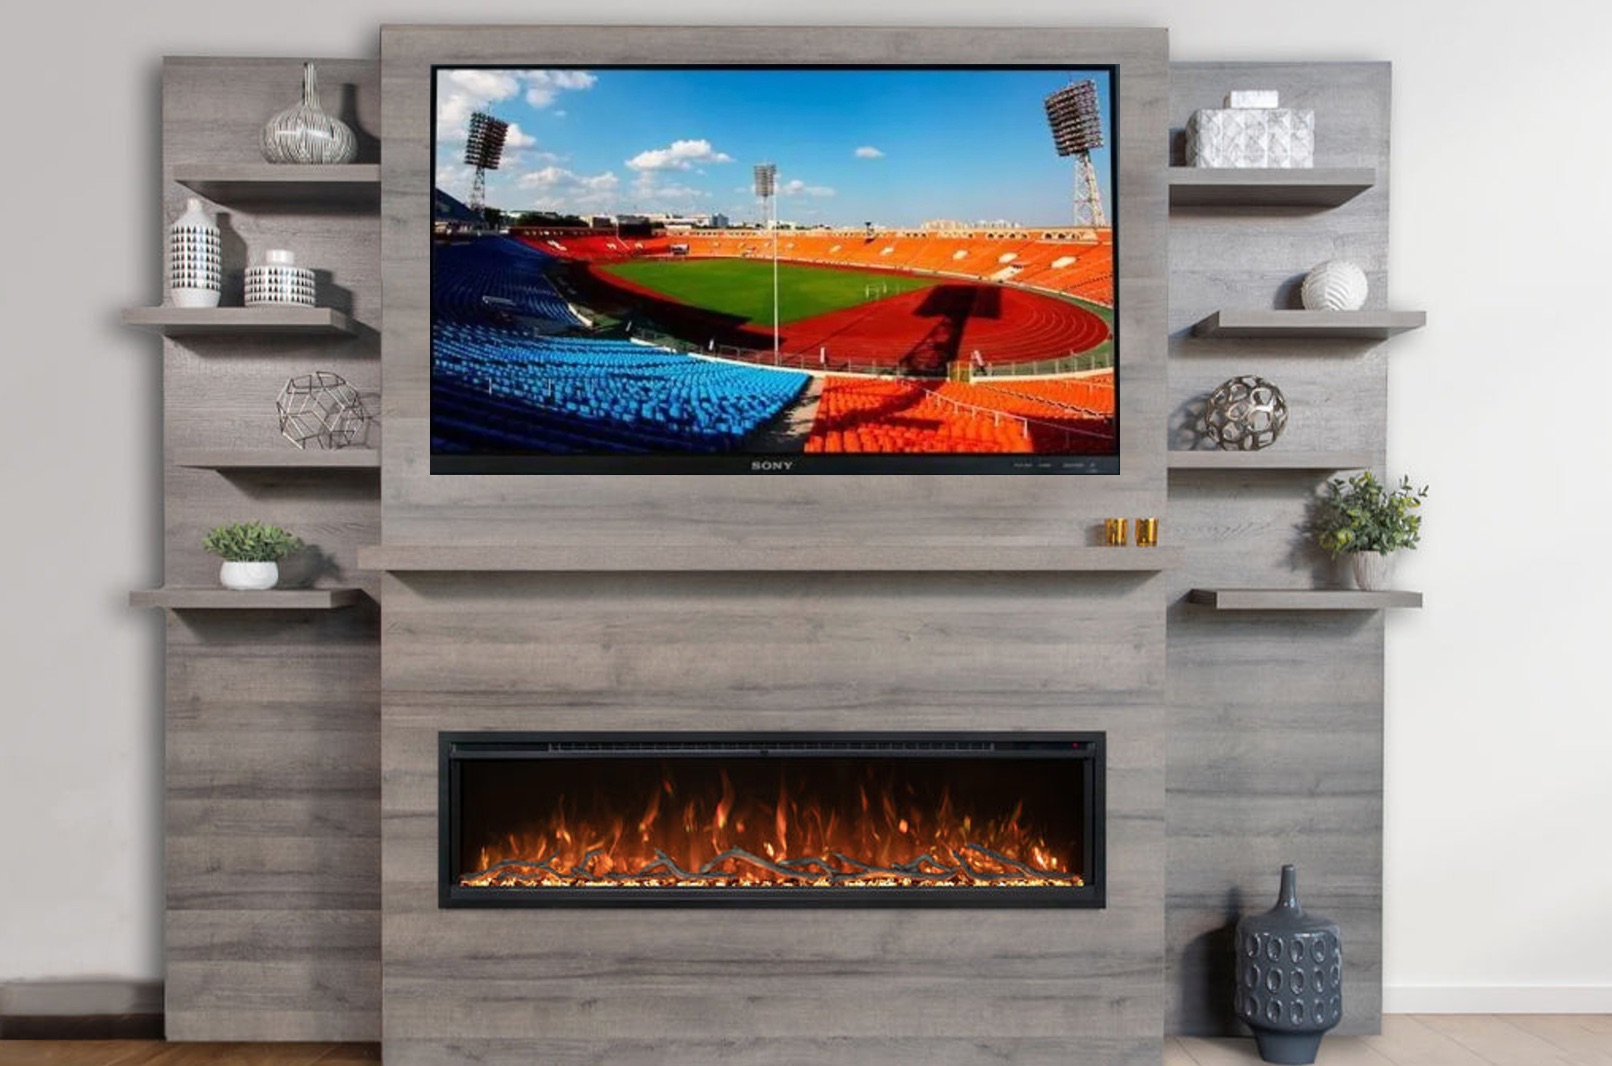 media wall with electric fireplace